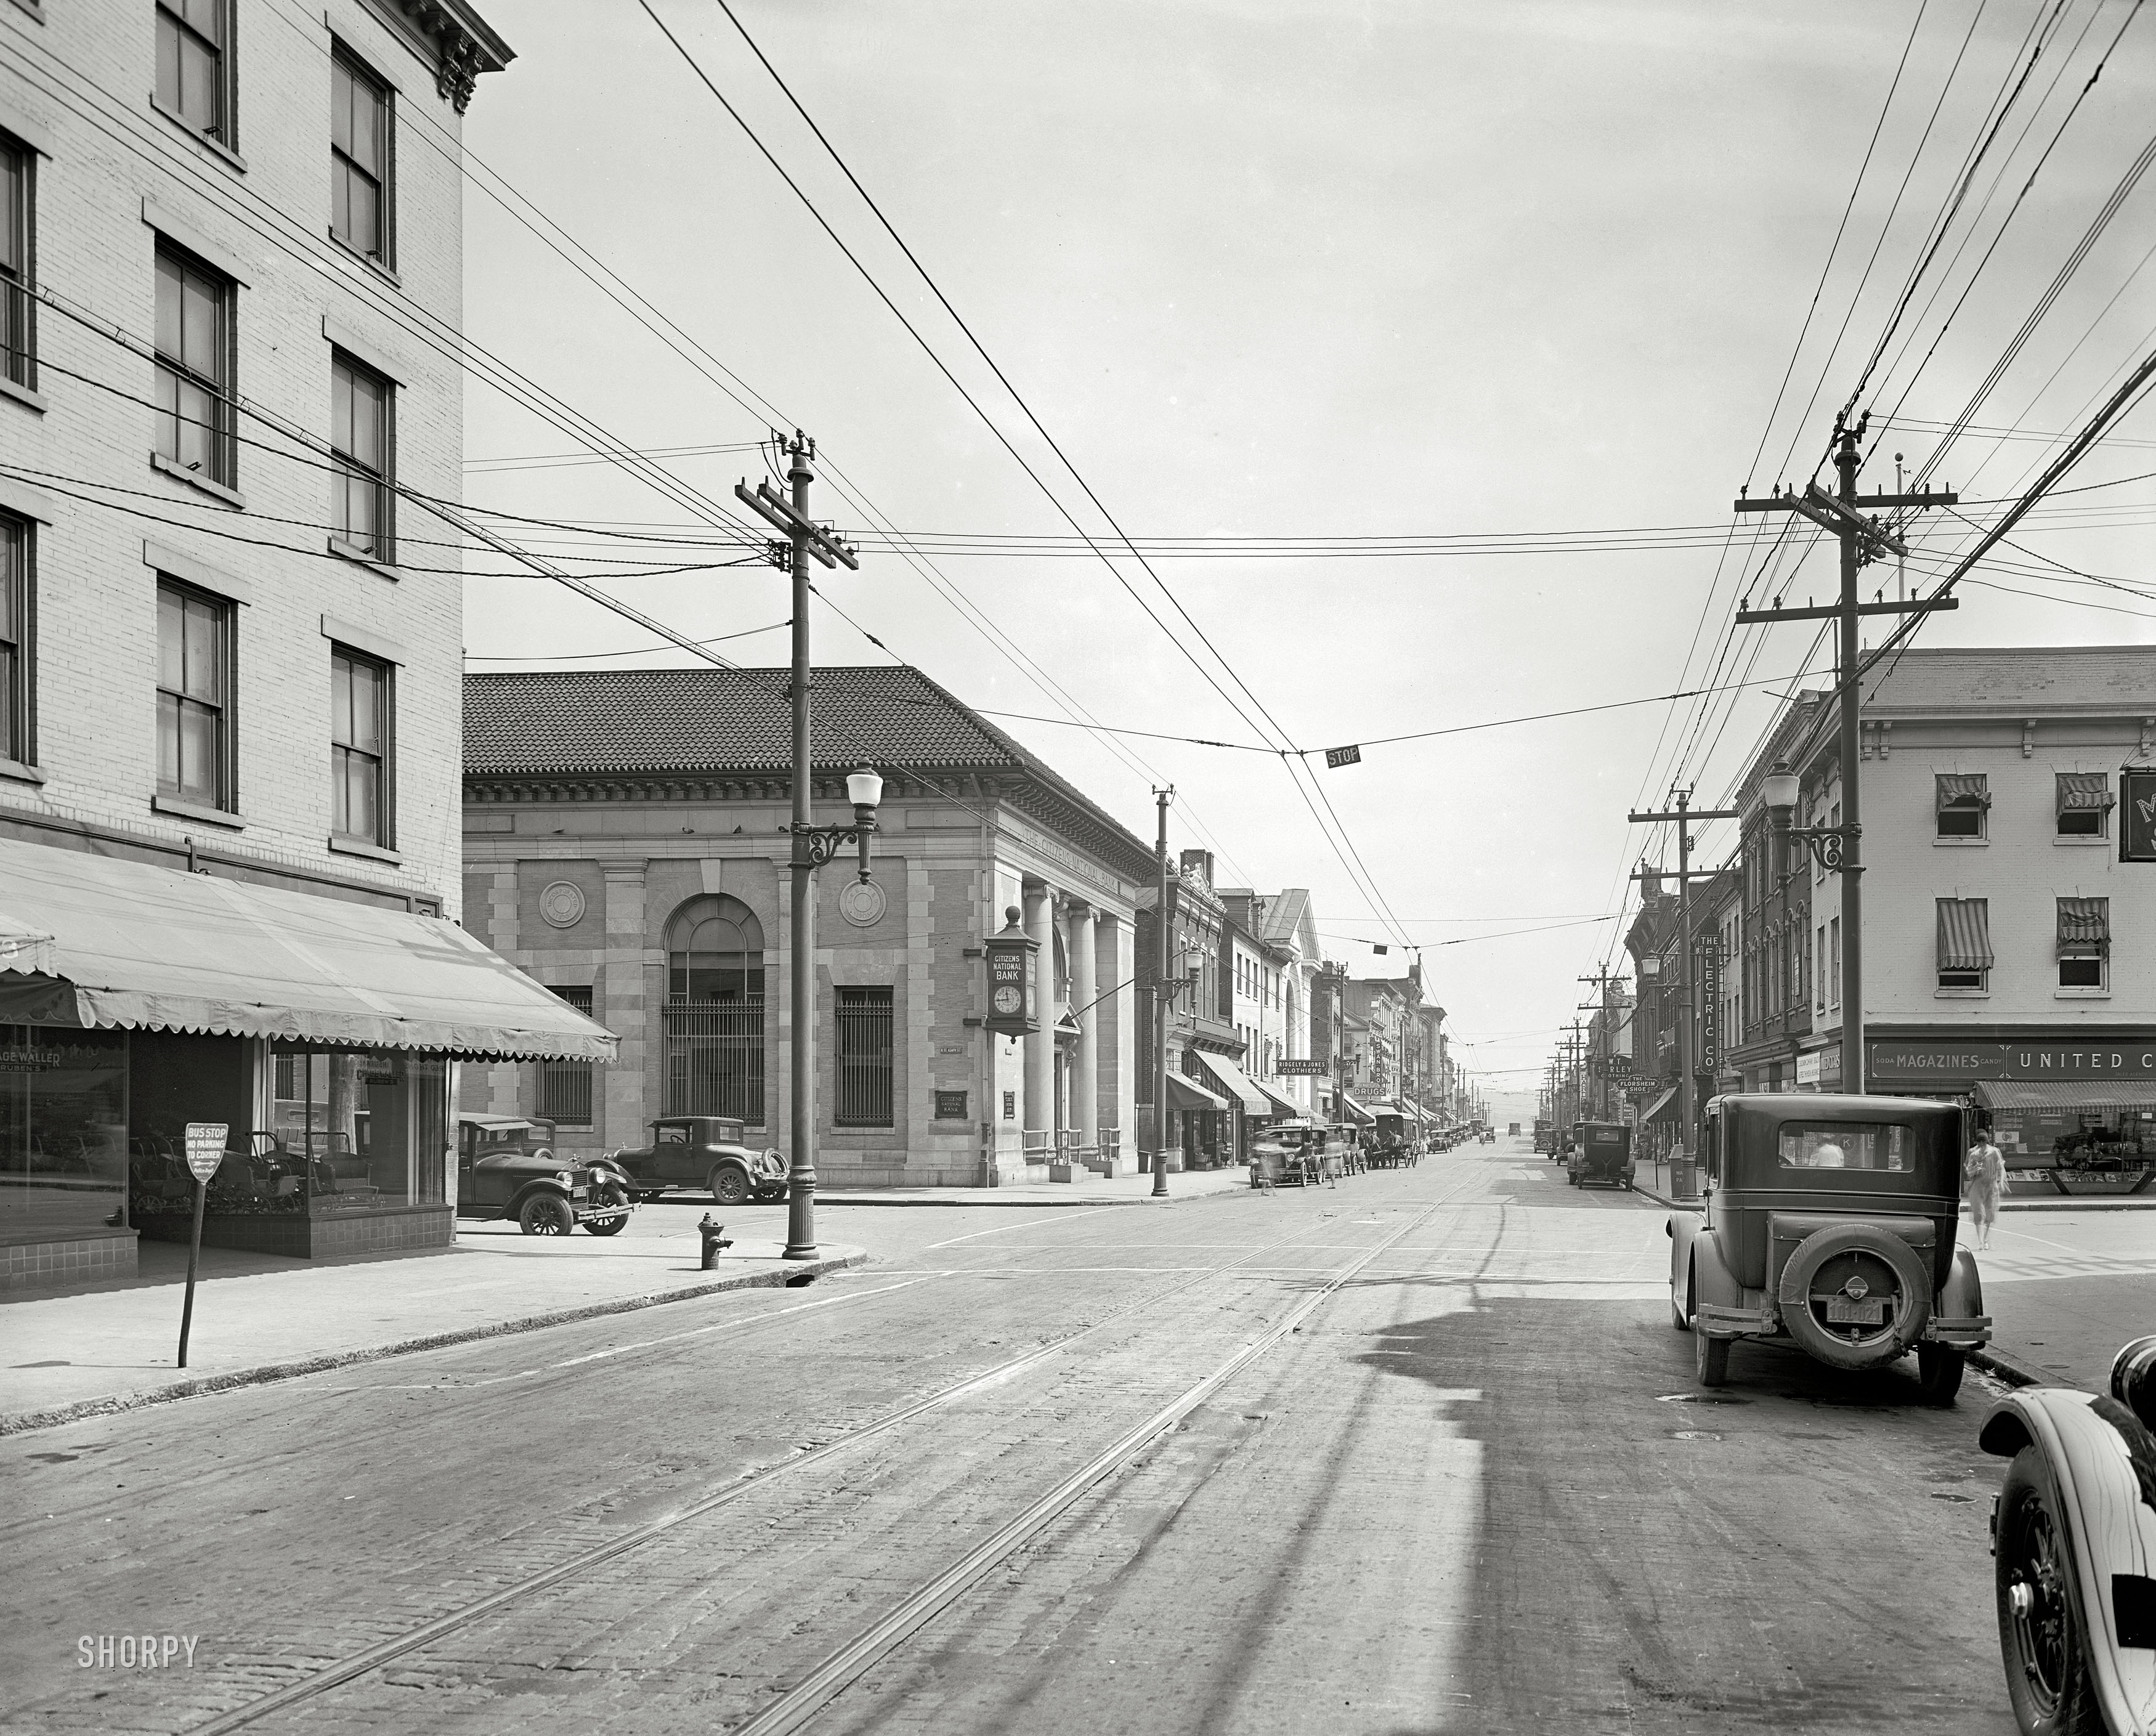 Alexandria, Virginia, 1926. "Citizens National Bank, King Street at St. Asaph Street." National Photo Company Collection glass negative. View full size.